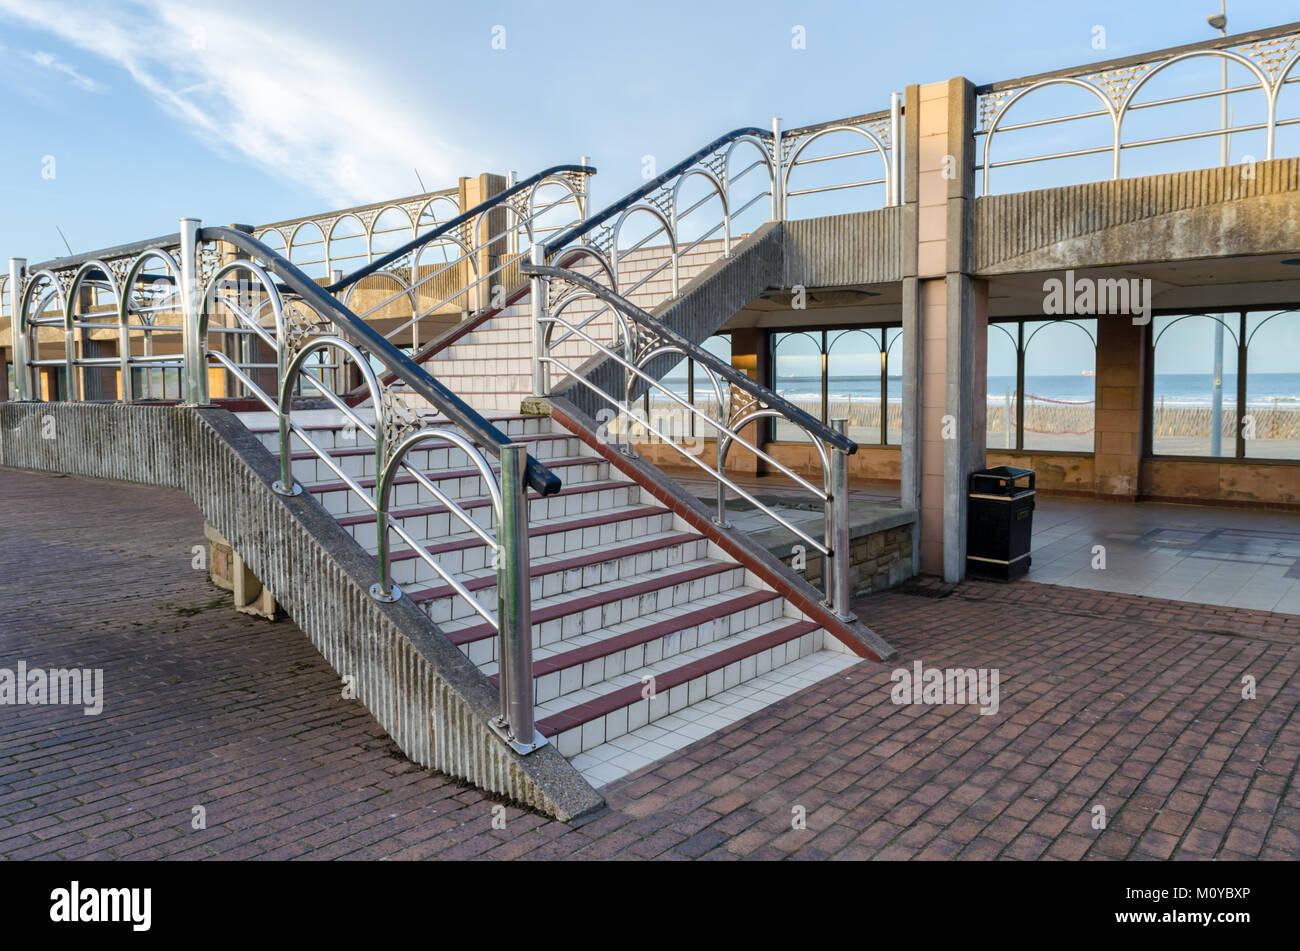 Ornate Stairway at The Arcade located at The Amphitheatre, South Shields Stock Photo